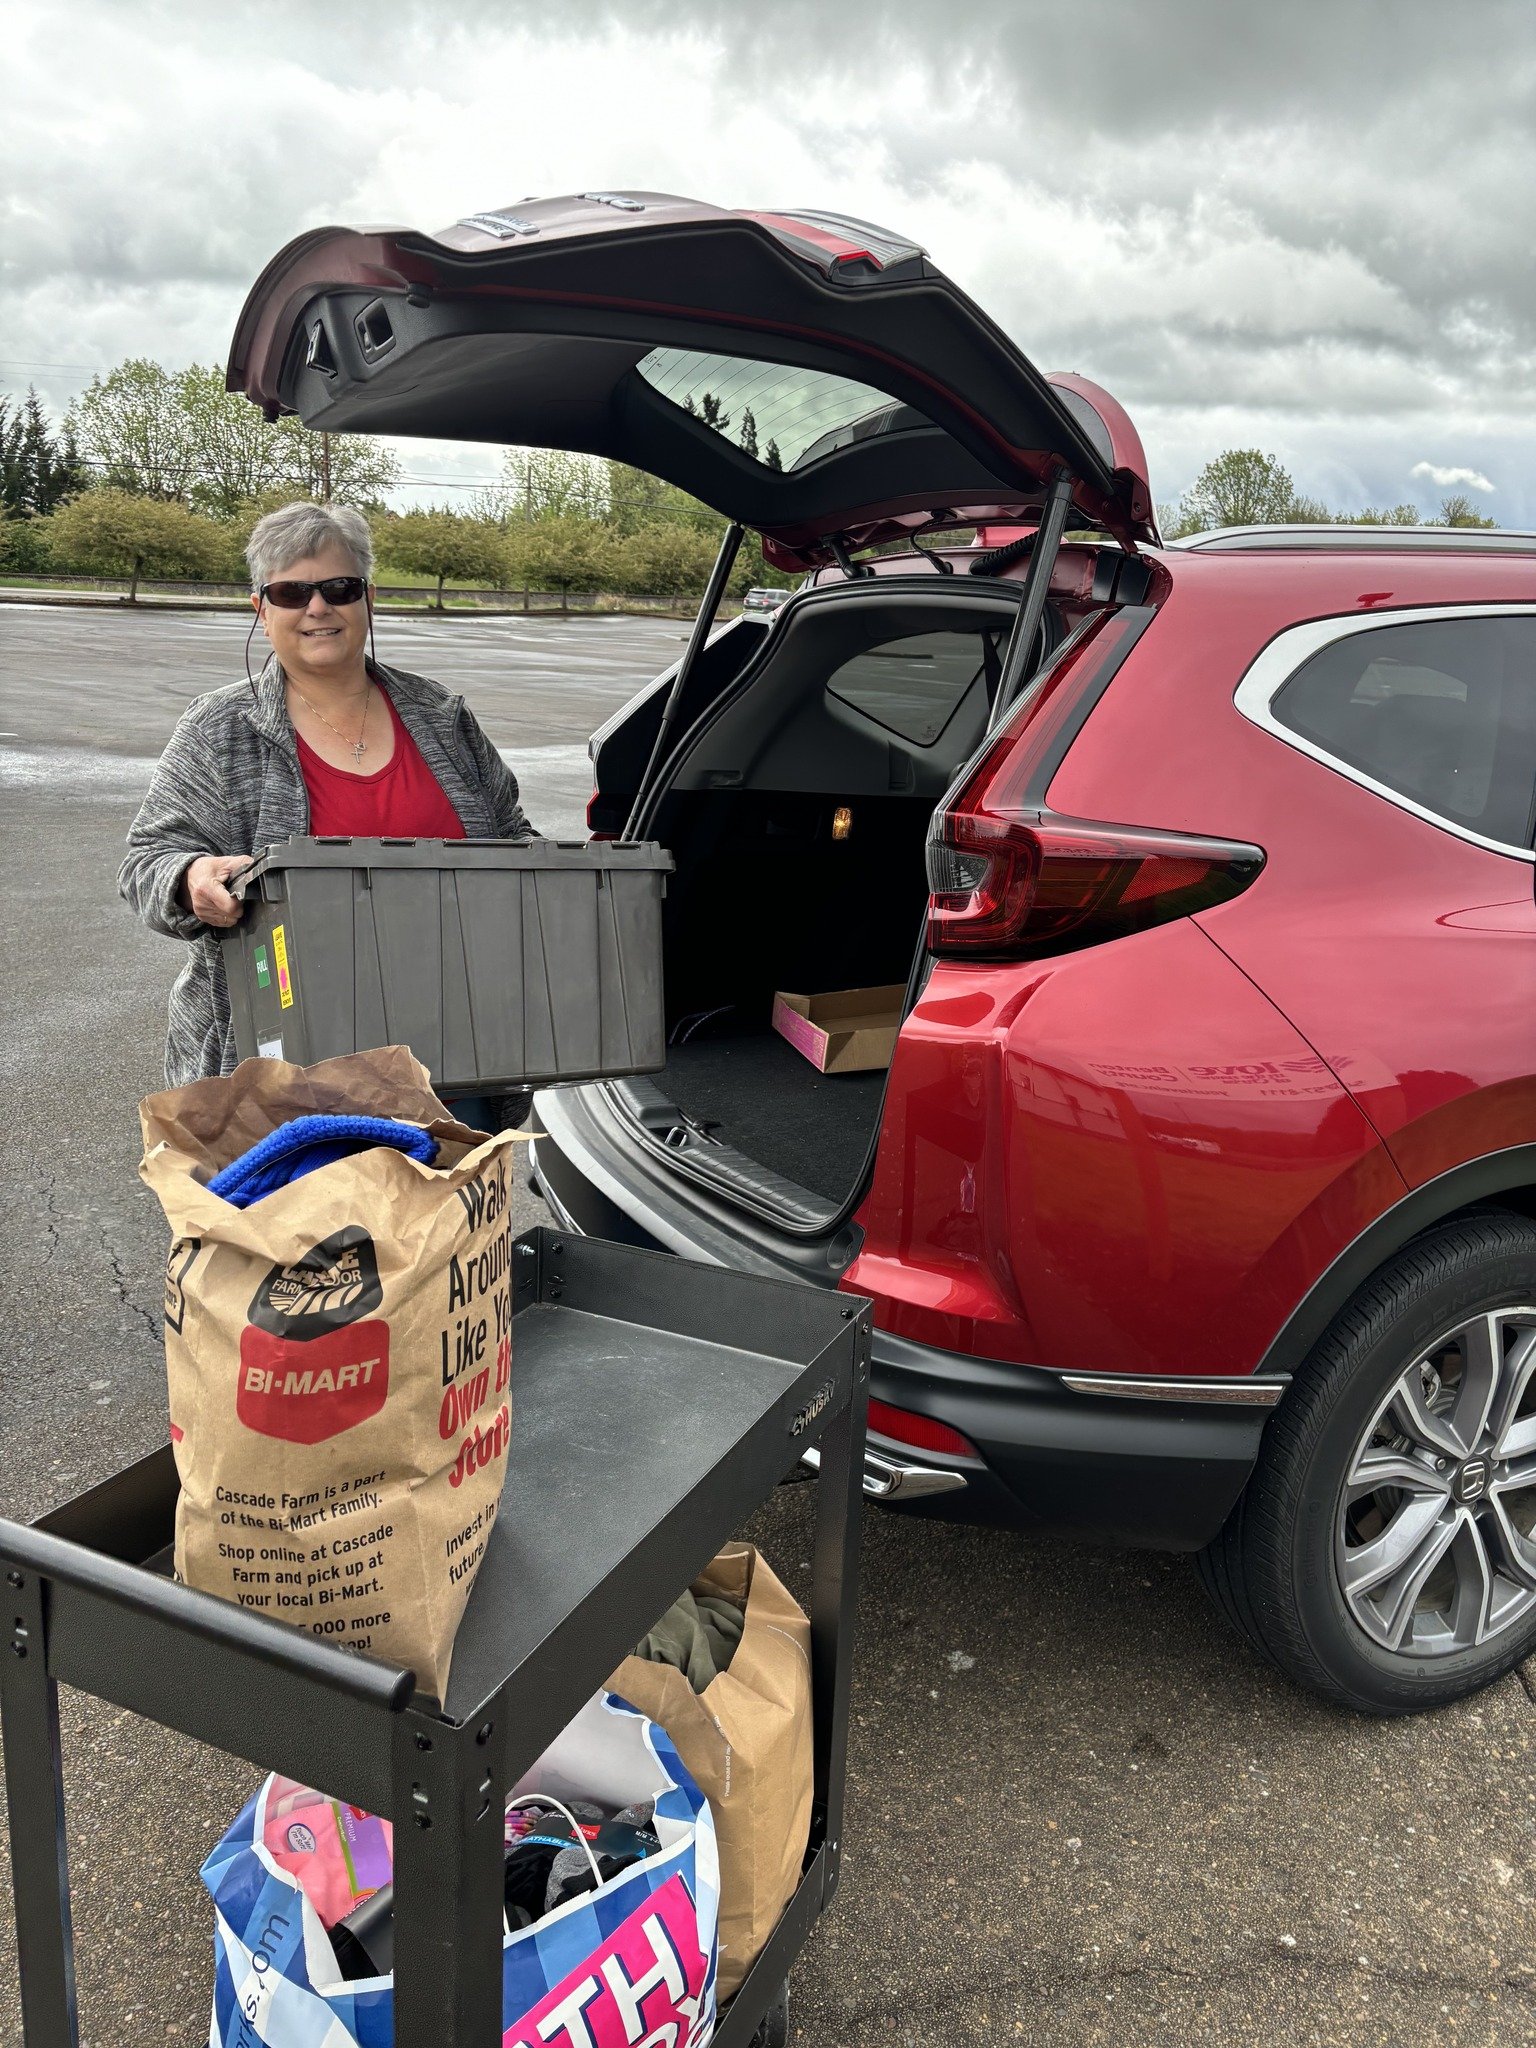 BIG THANKS to the churches, individuals, and groups that responded to the Linen Closet's low inventory alert. Here's Cheryl loading up her car with donations, which will serve more people. We're so grateful for you!